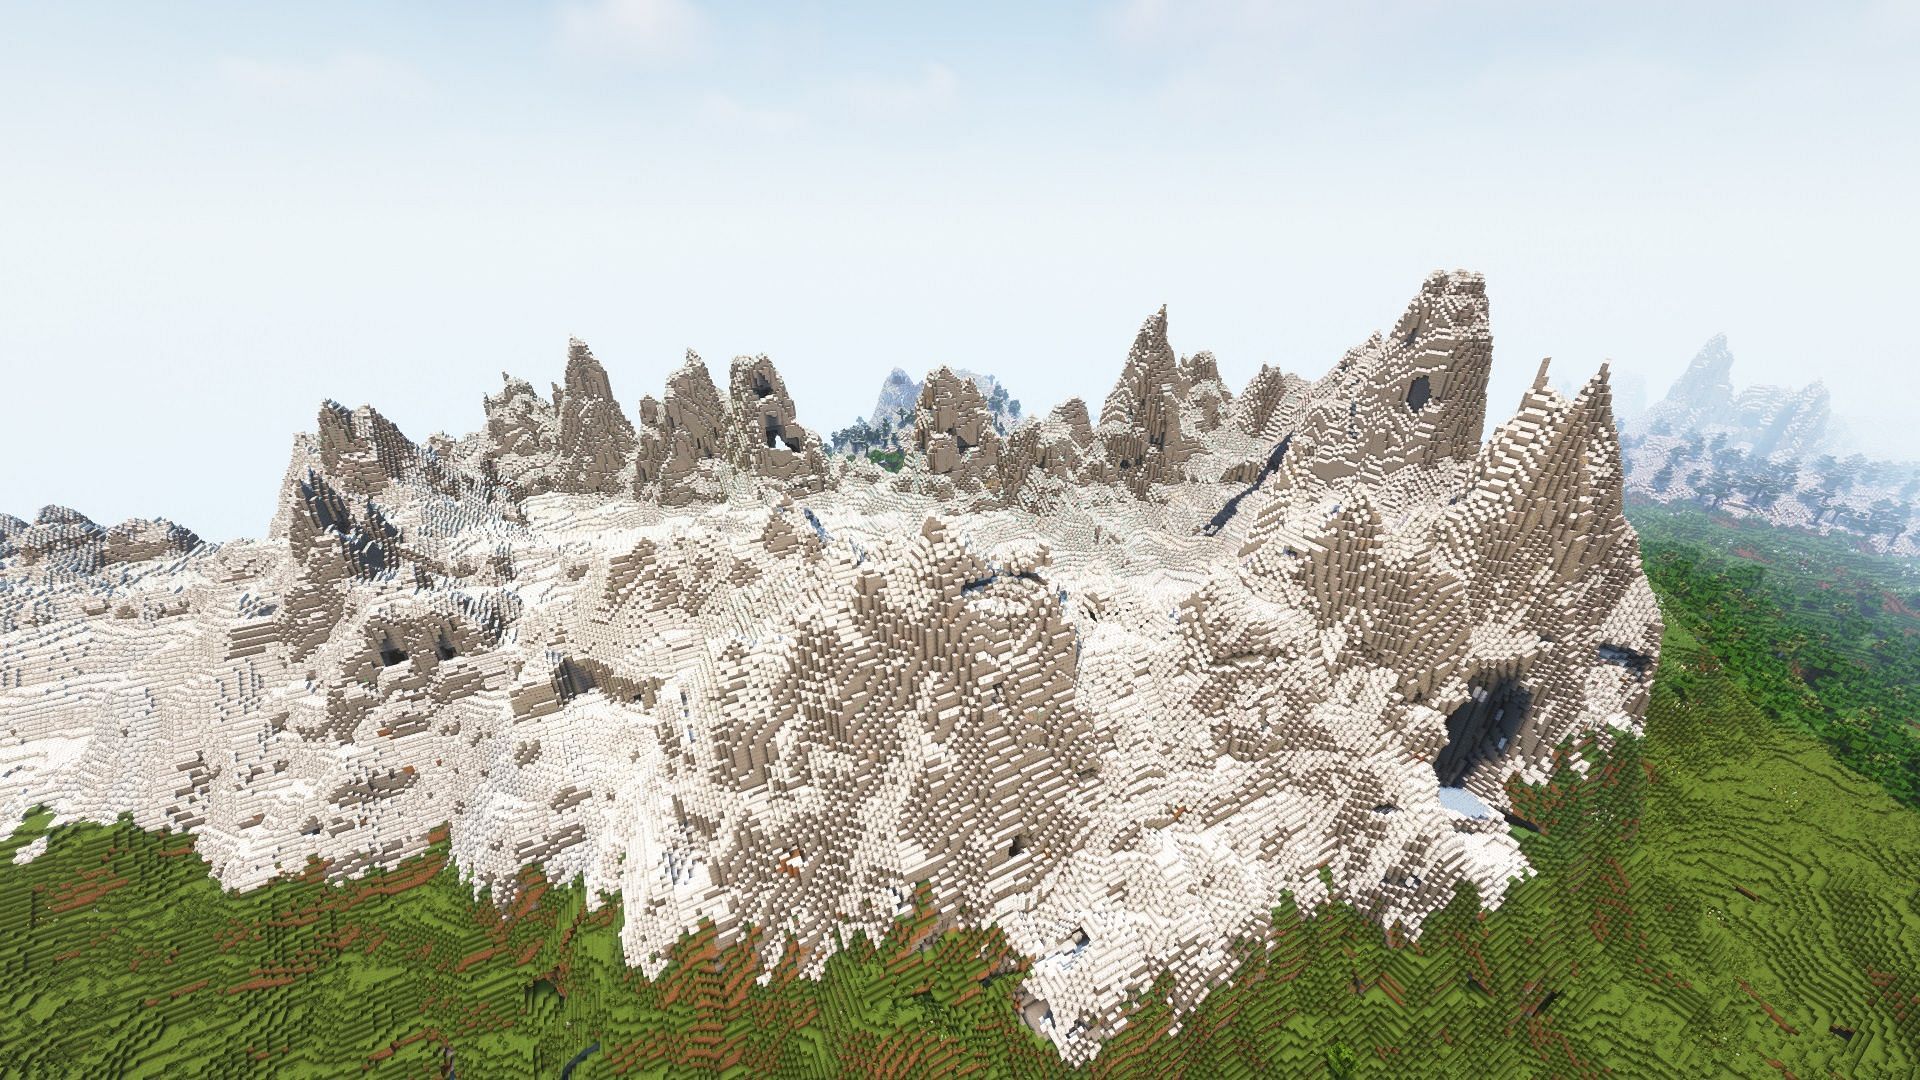 Some of the tallest jagged peaks in Minecraft (Image via Mojang)